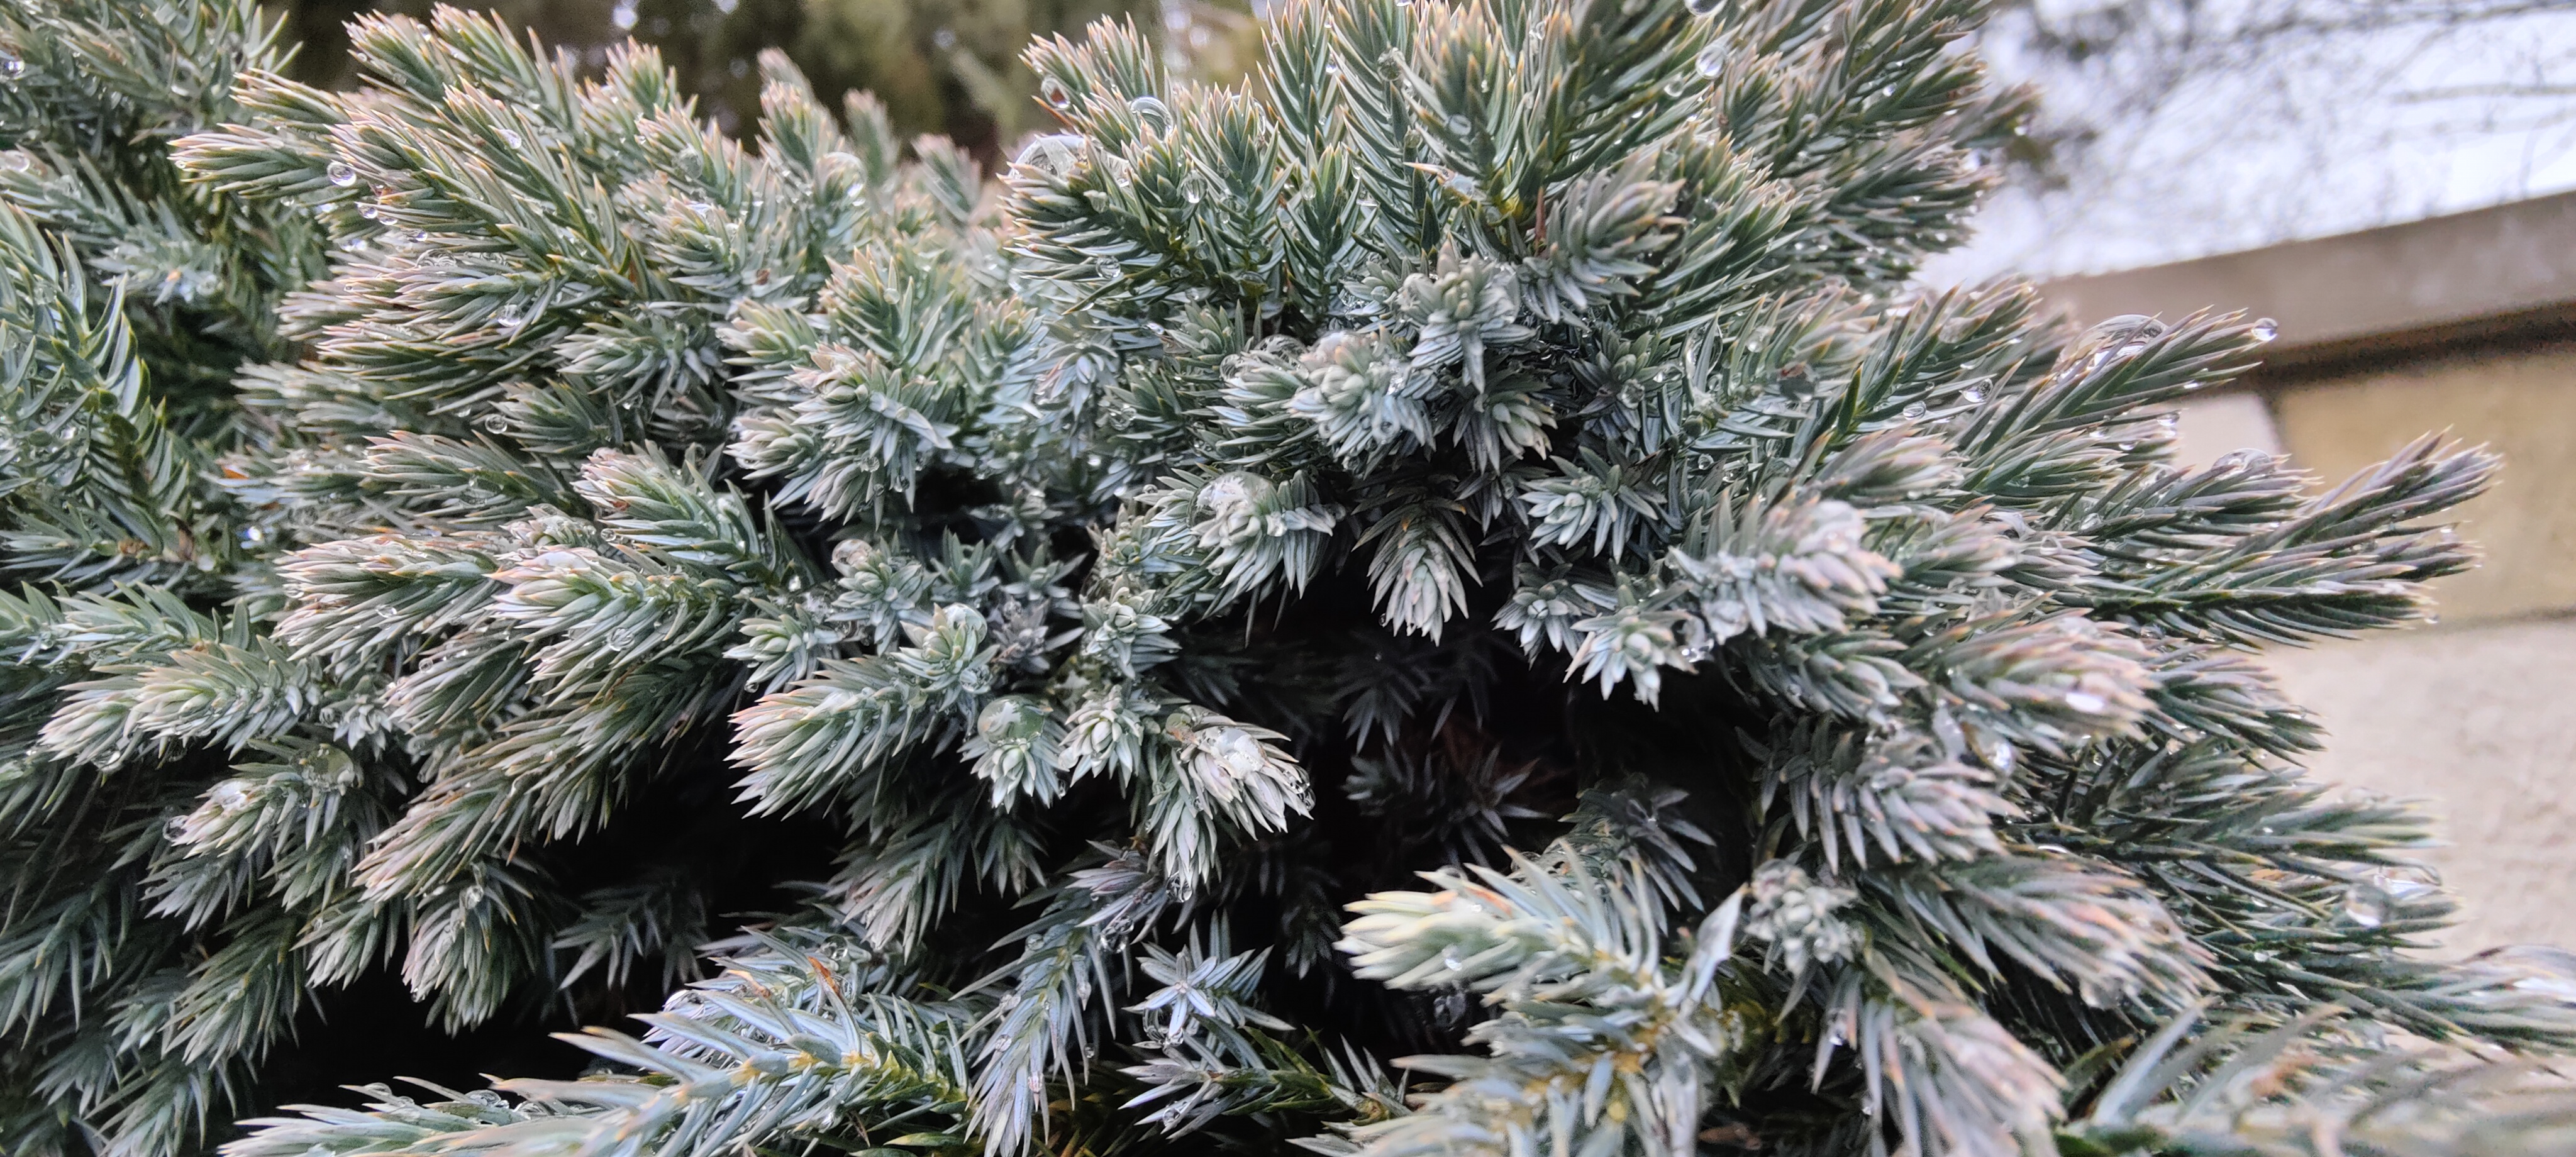 Trying to capture the dewdrops on the juniper.